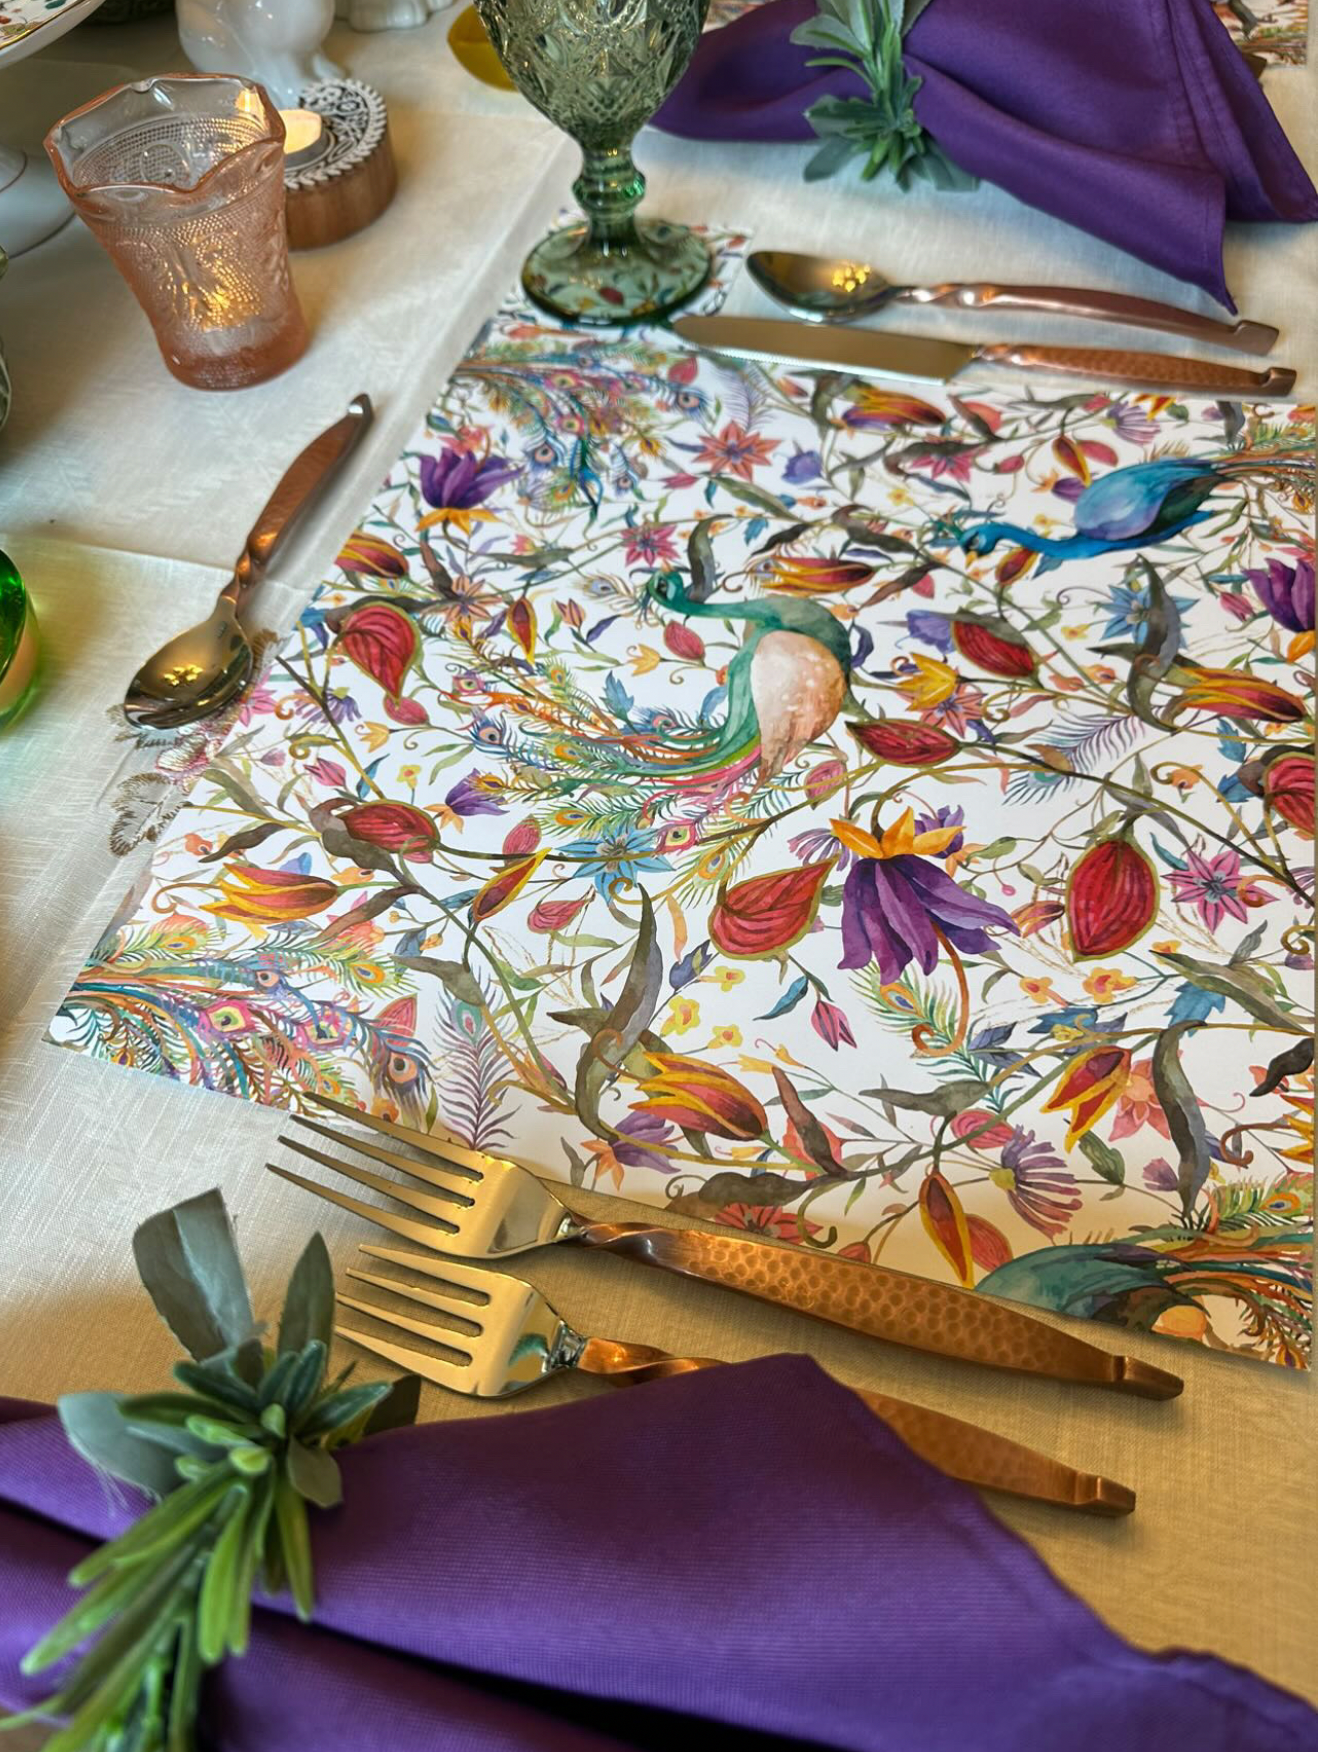 COLORFUL PEACOCK PAPER PLACEMAT